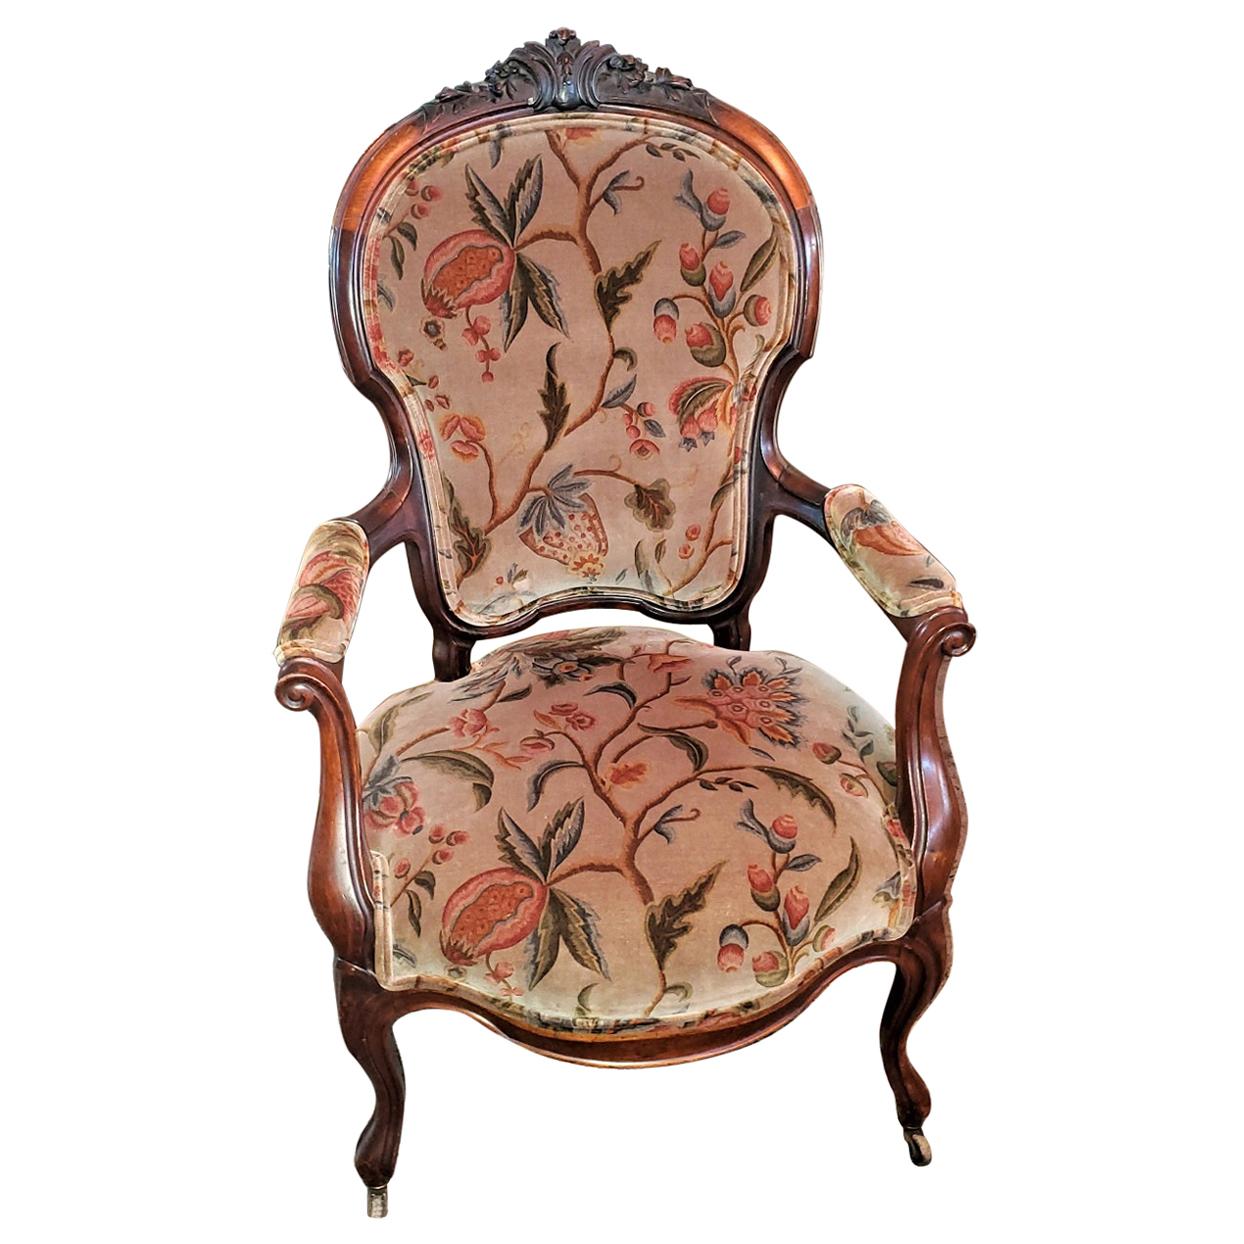 19th Century French Country Boudoir Armchair